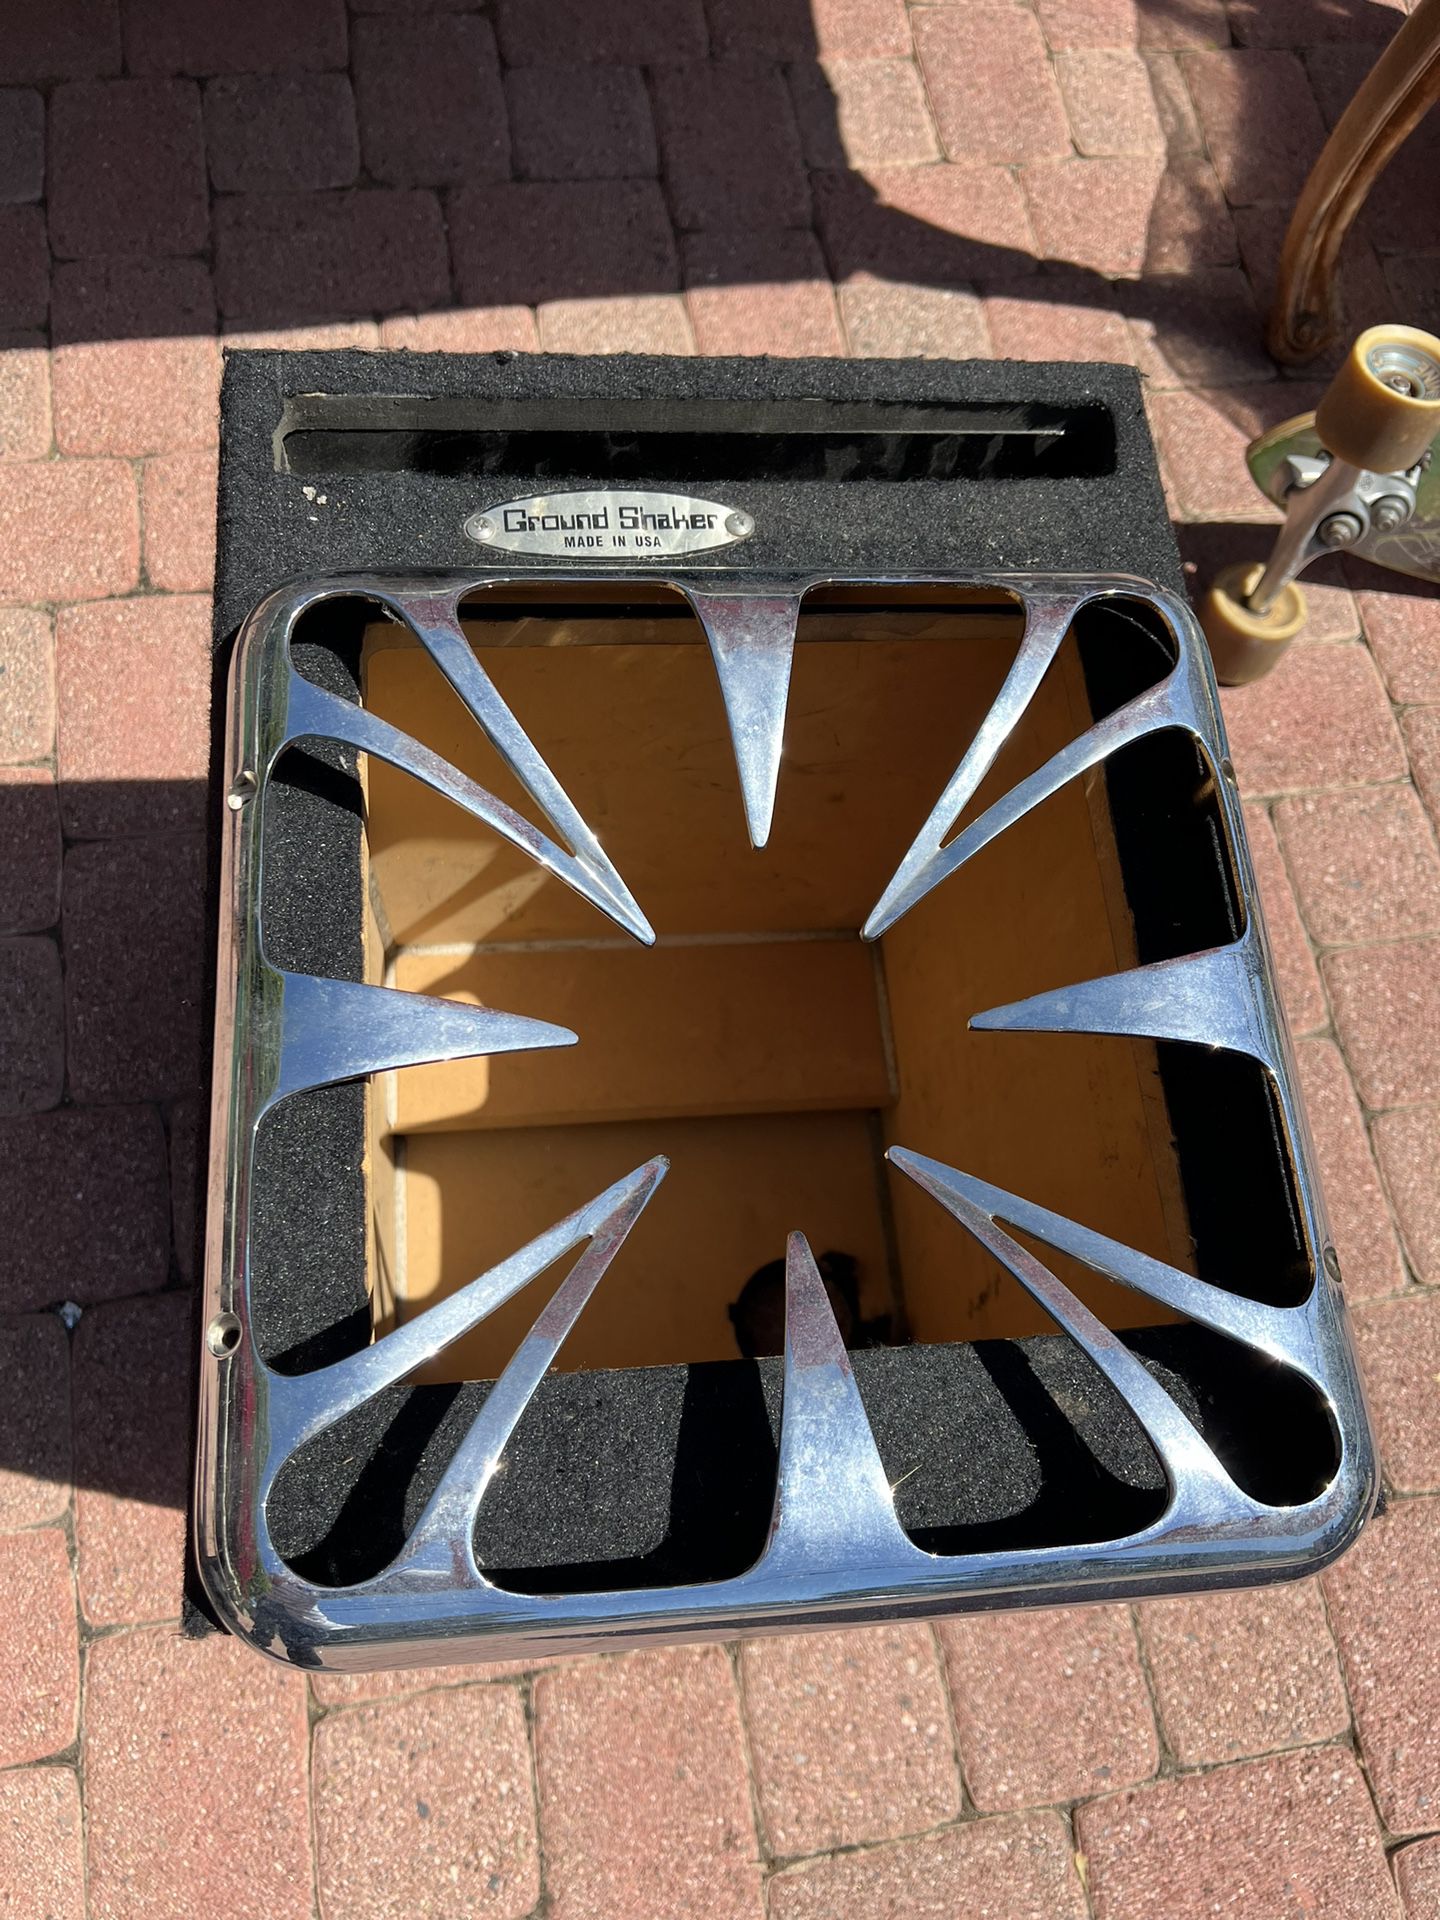 Ground Shaker SubWoofer Boxes